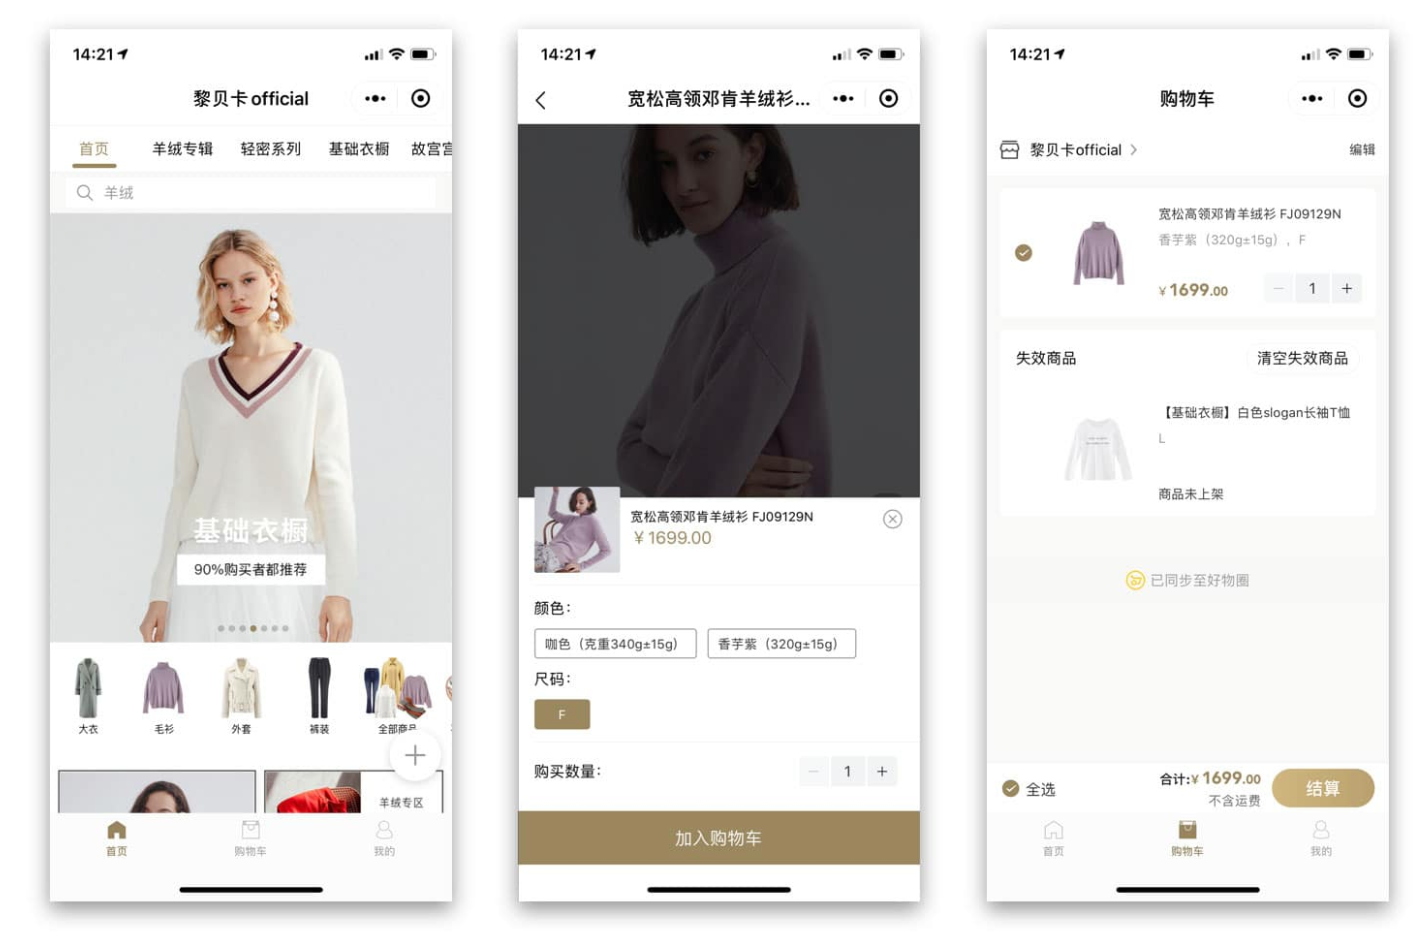 Youzan provides a WeChat store platform enabling brands and influencers (such as Becky Li) to sell through WeChat Mini Program.